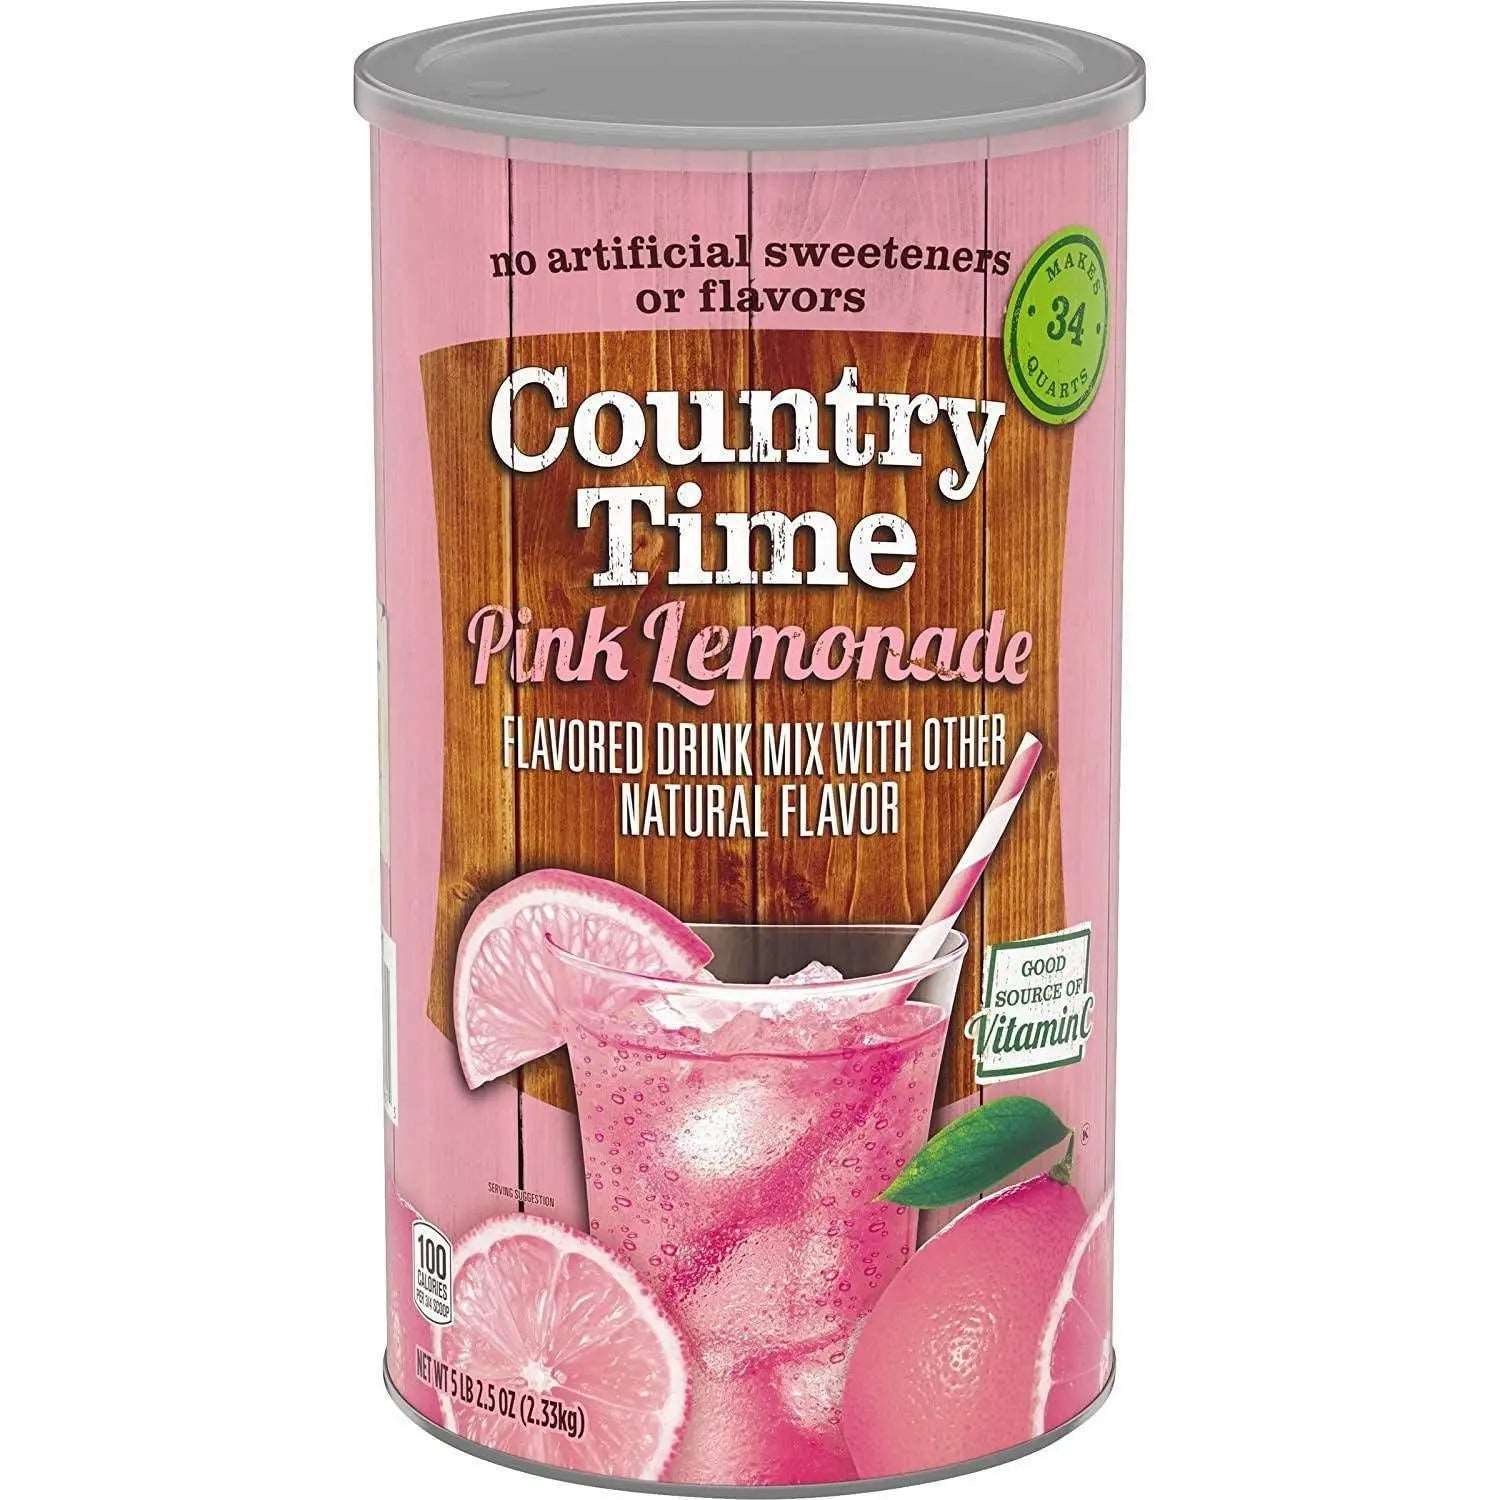 Wholesale prices with free shipping all over United States Country Time Pink Lemonade Drink Mix, pack of 2 - Steven Deals